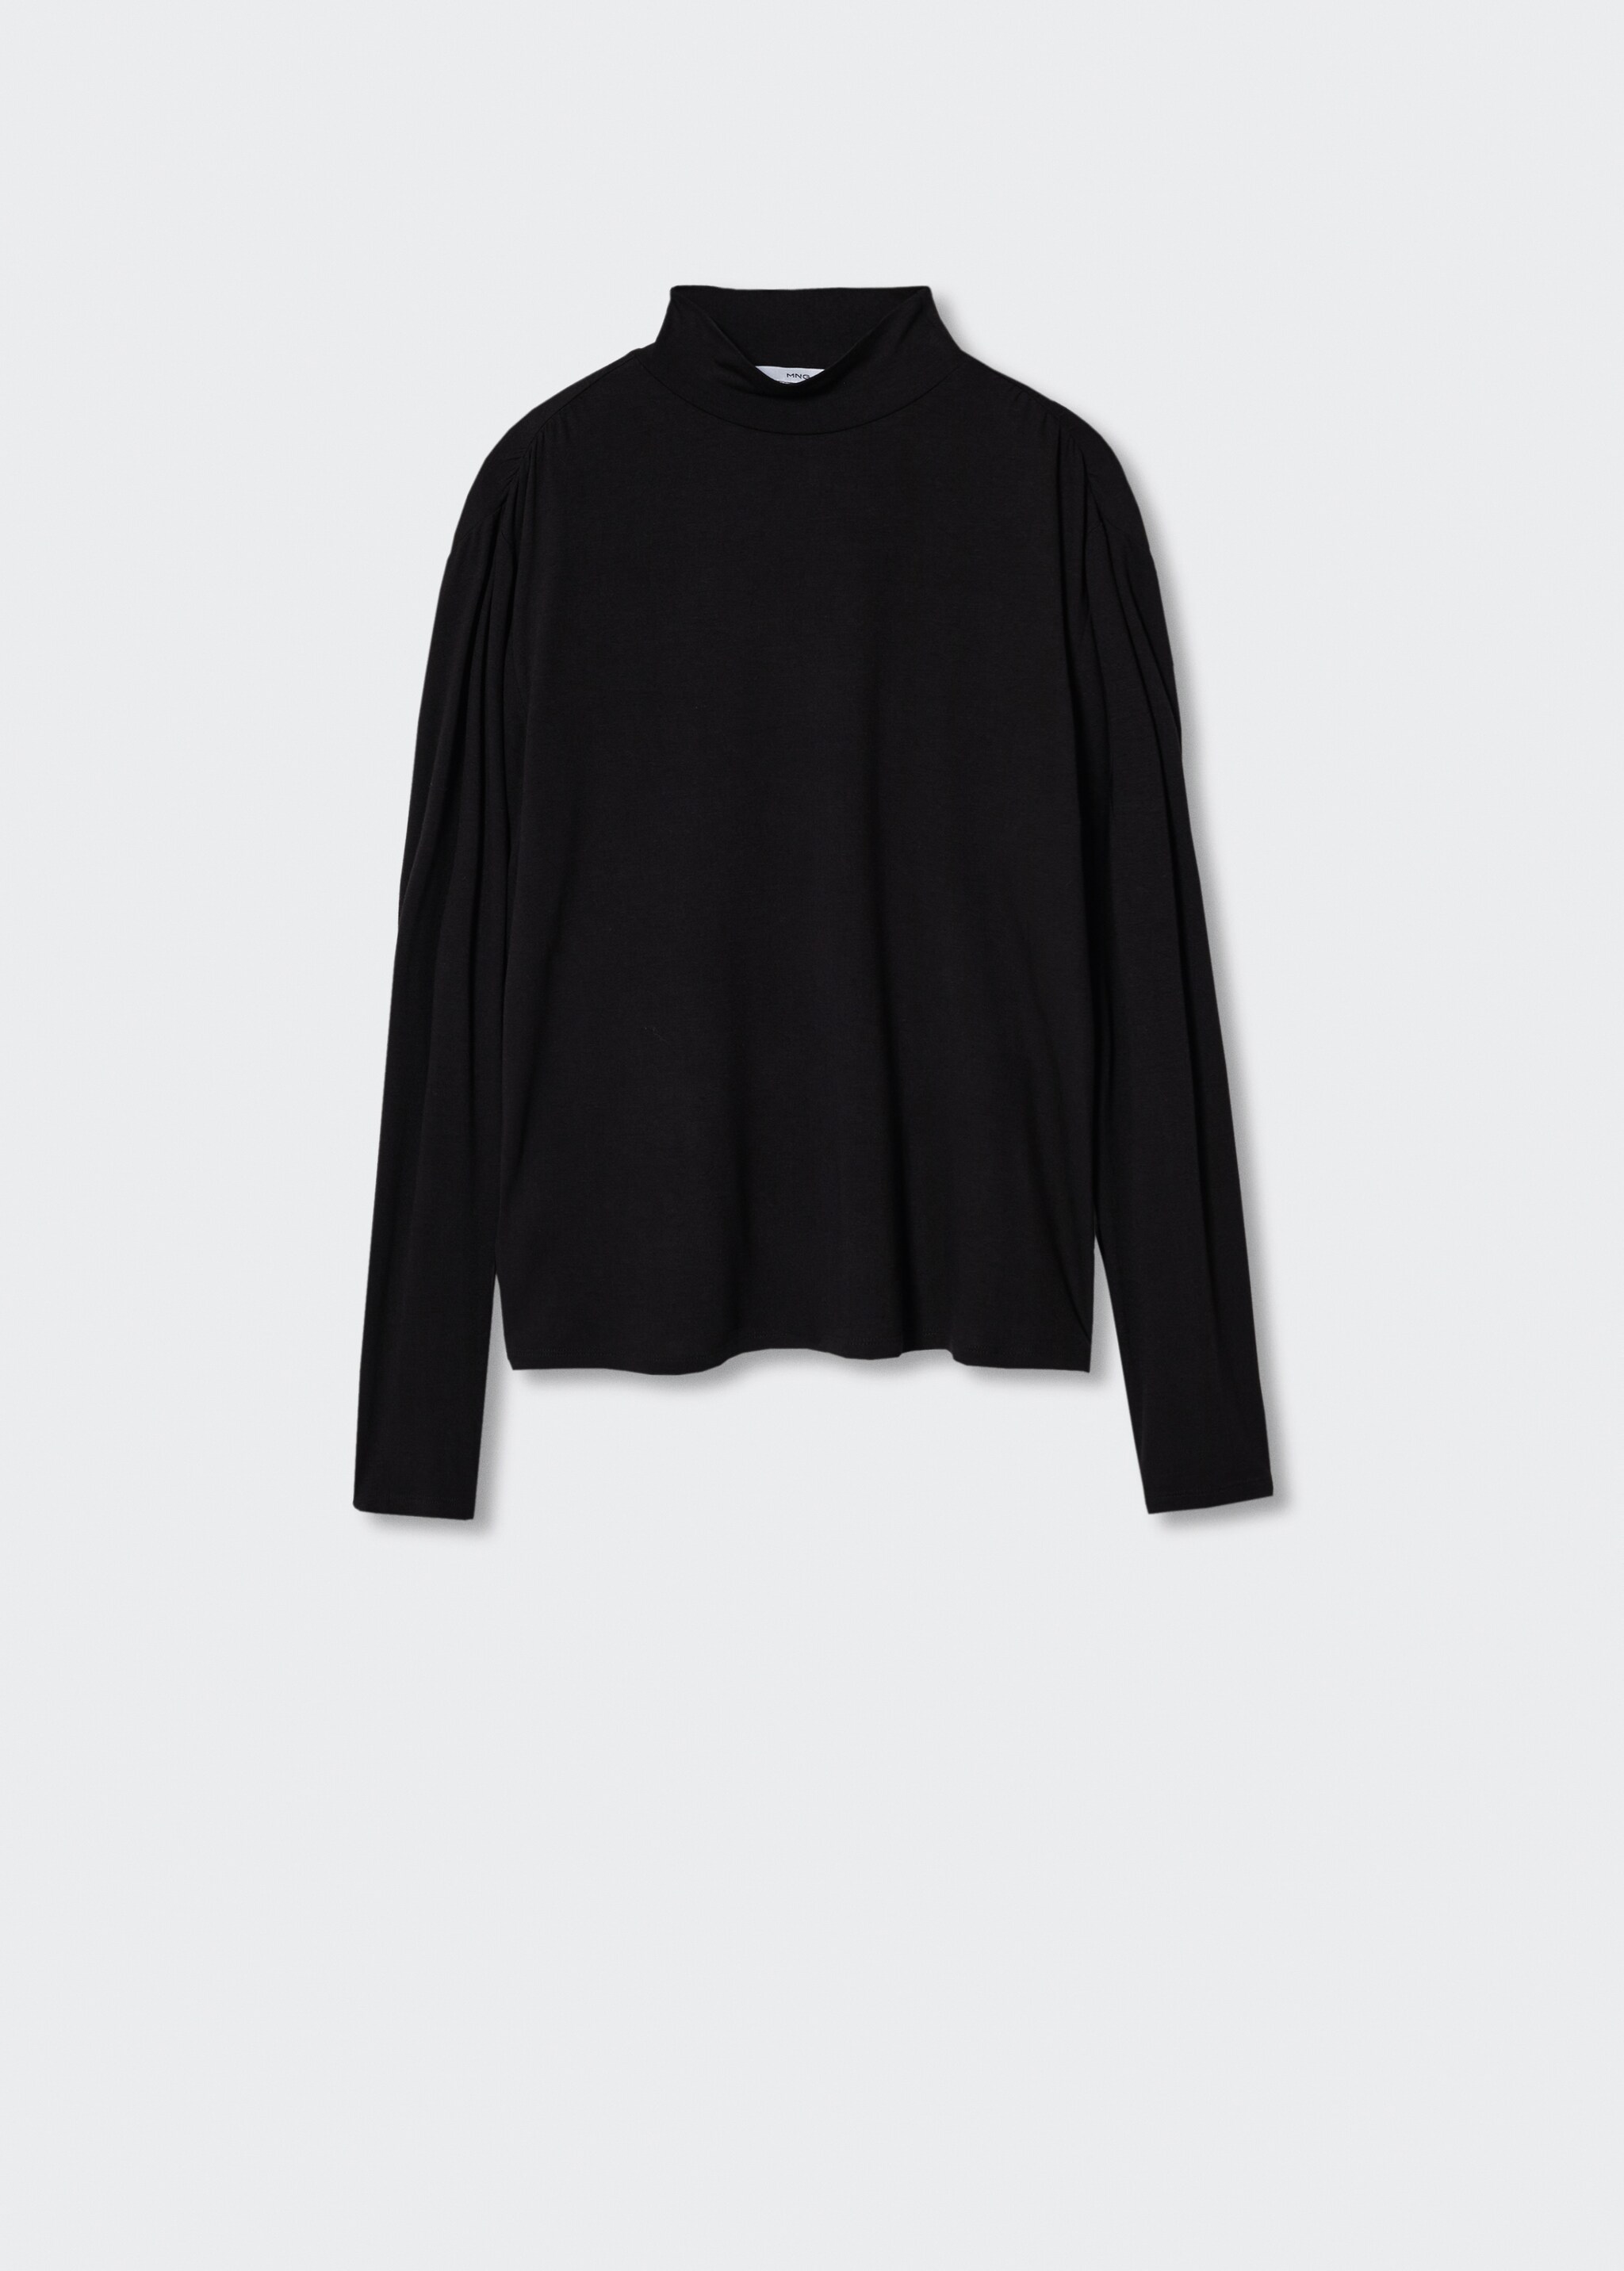 Turtleneck long-sleeved t-shirt - Article without model